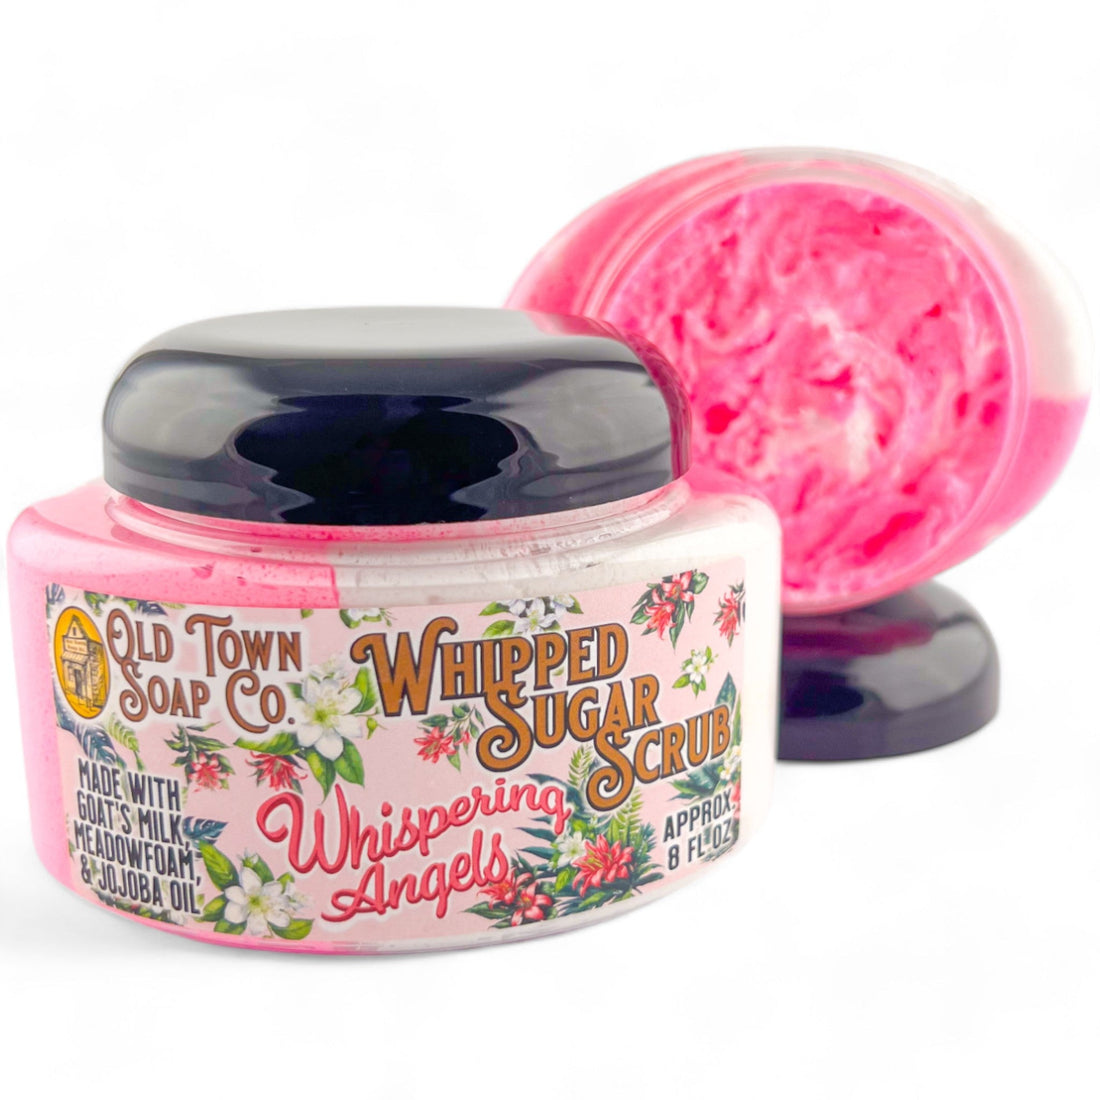 Whispering Angels -Whipped Sugar Scrub Soap - Old Town Soap Co.